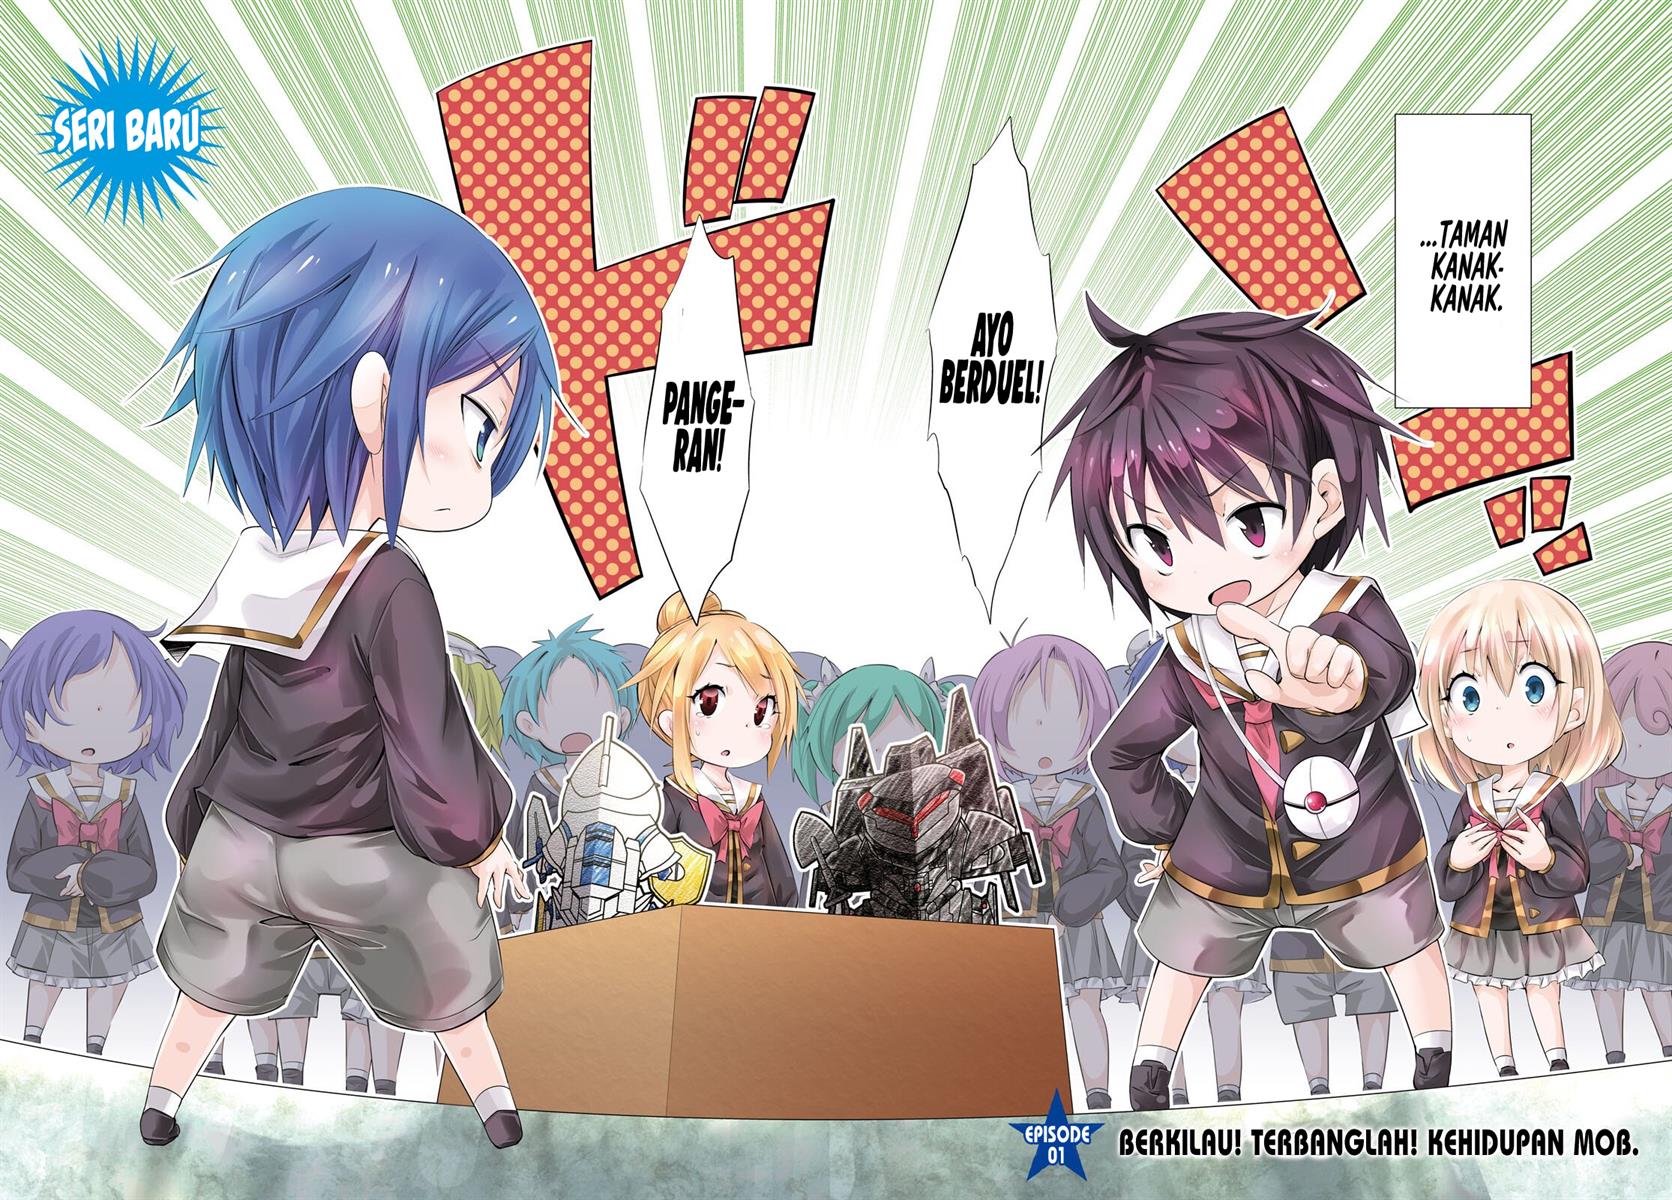 The World of Otome Games Kindergarten is Tough for Mobs Chapter 1